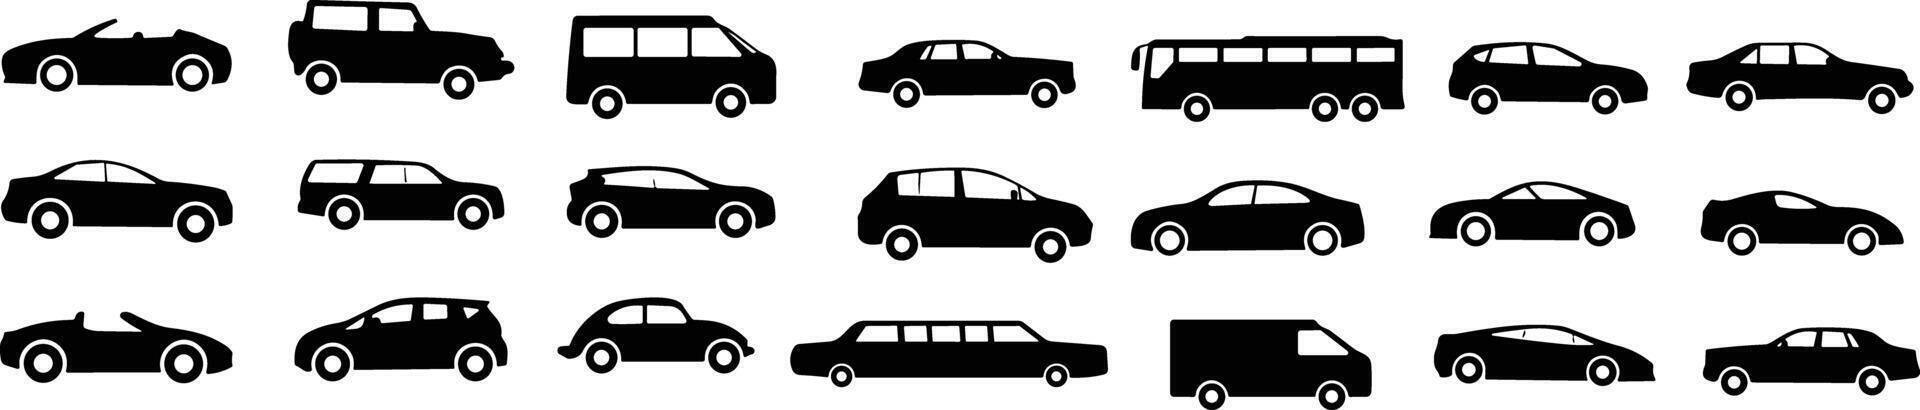 Cars Different types icons set. Different vehicles. Car van, bus, pickup Vector illustration. Collection transportation